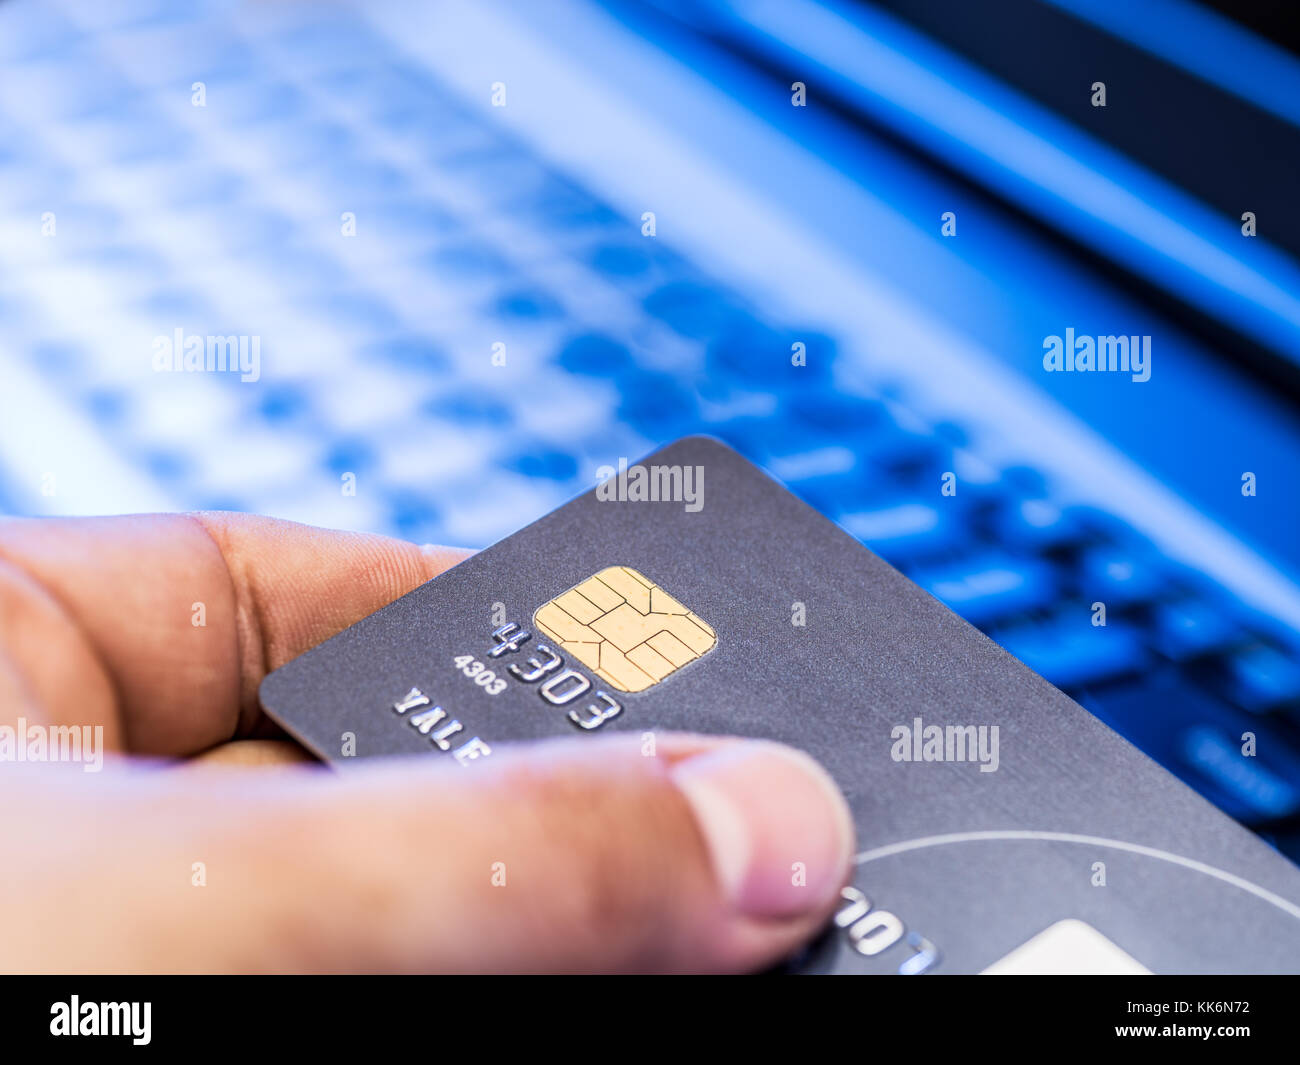 Credit cards. Financial business background. Stock Photo